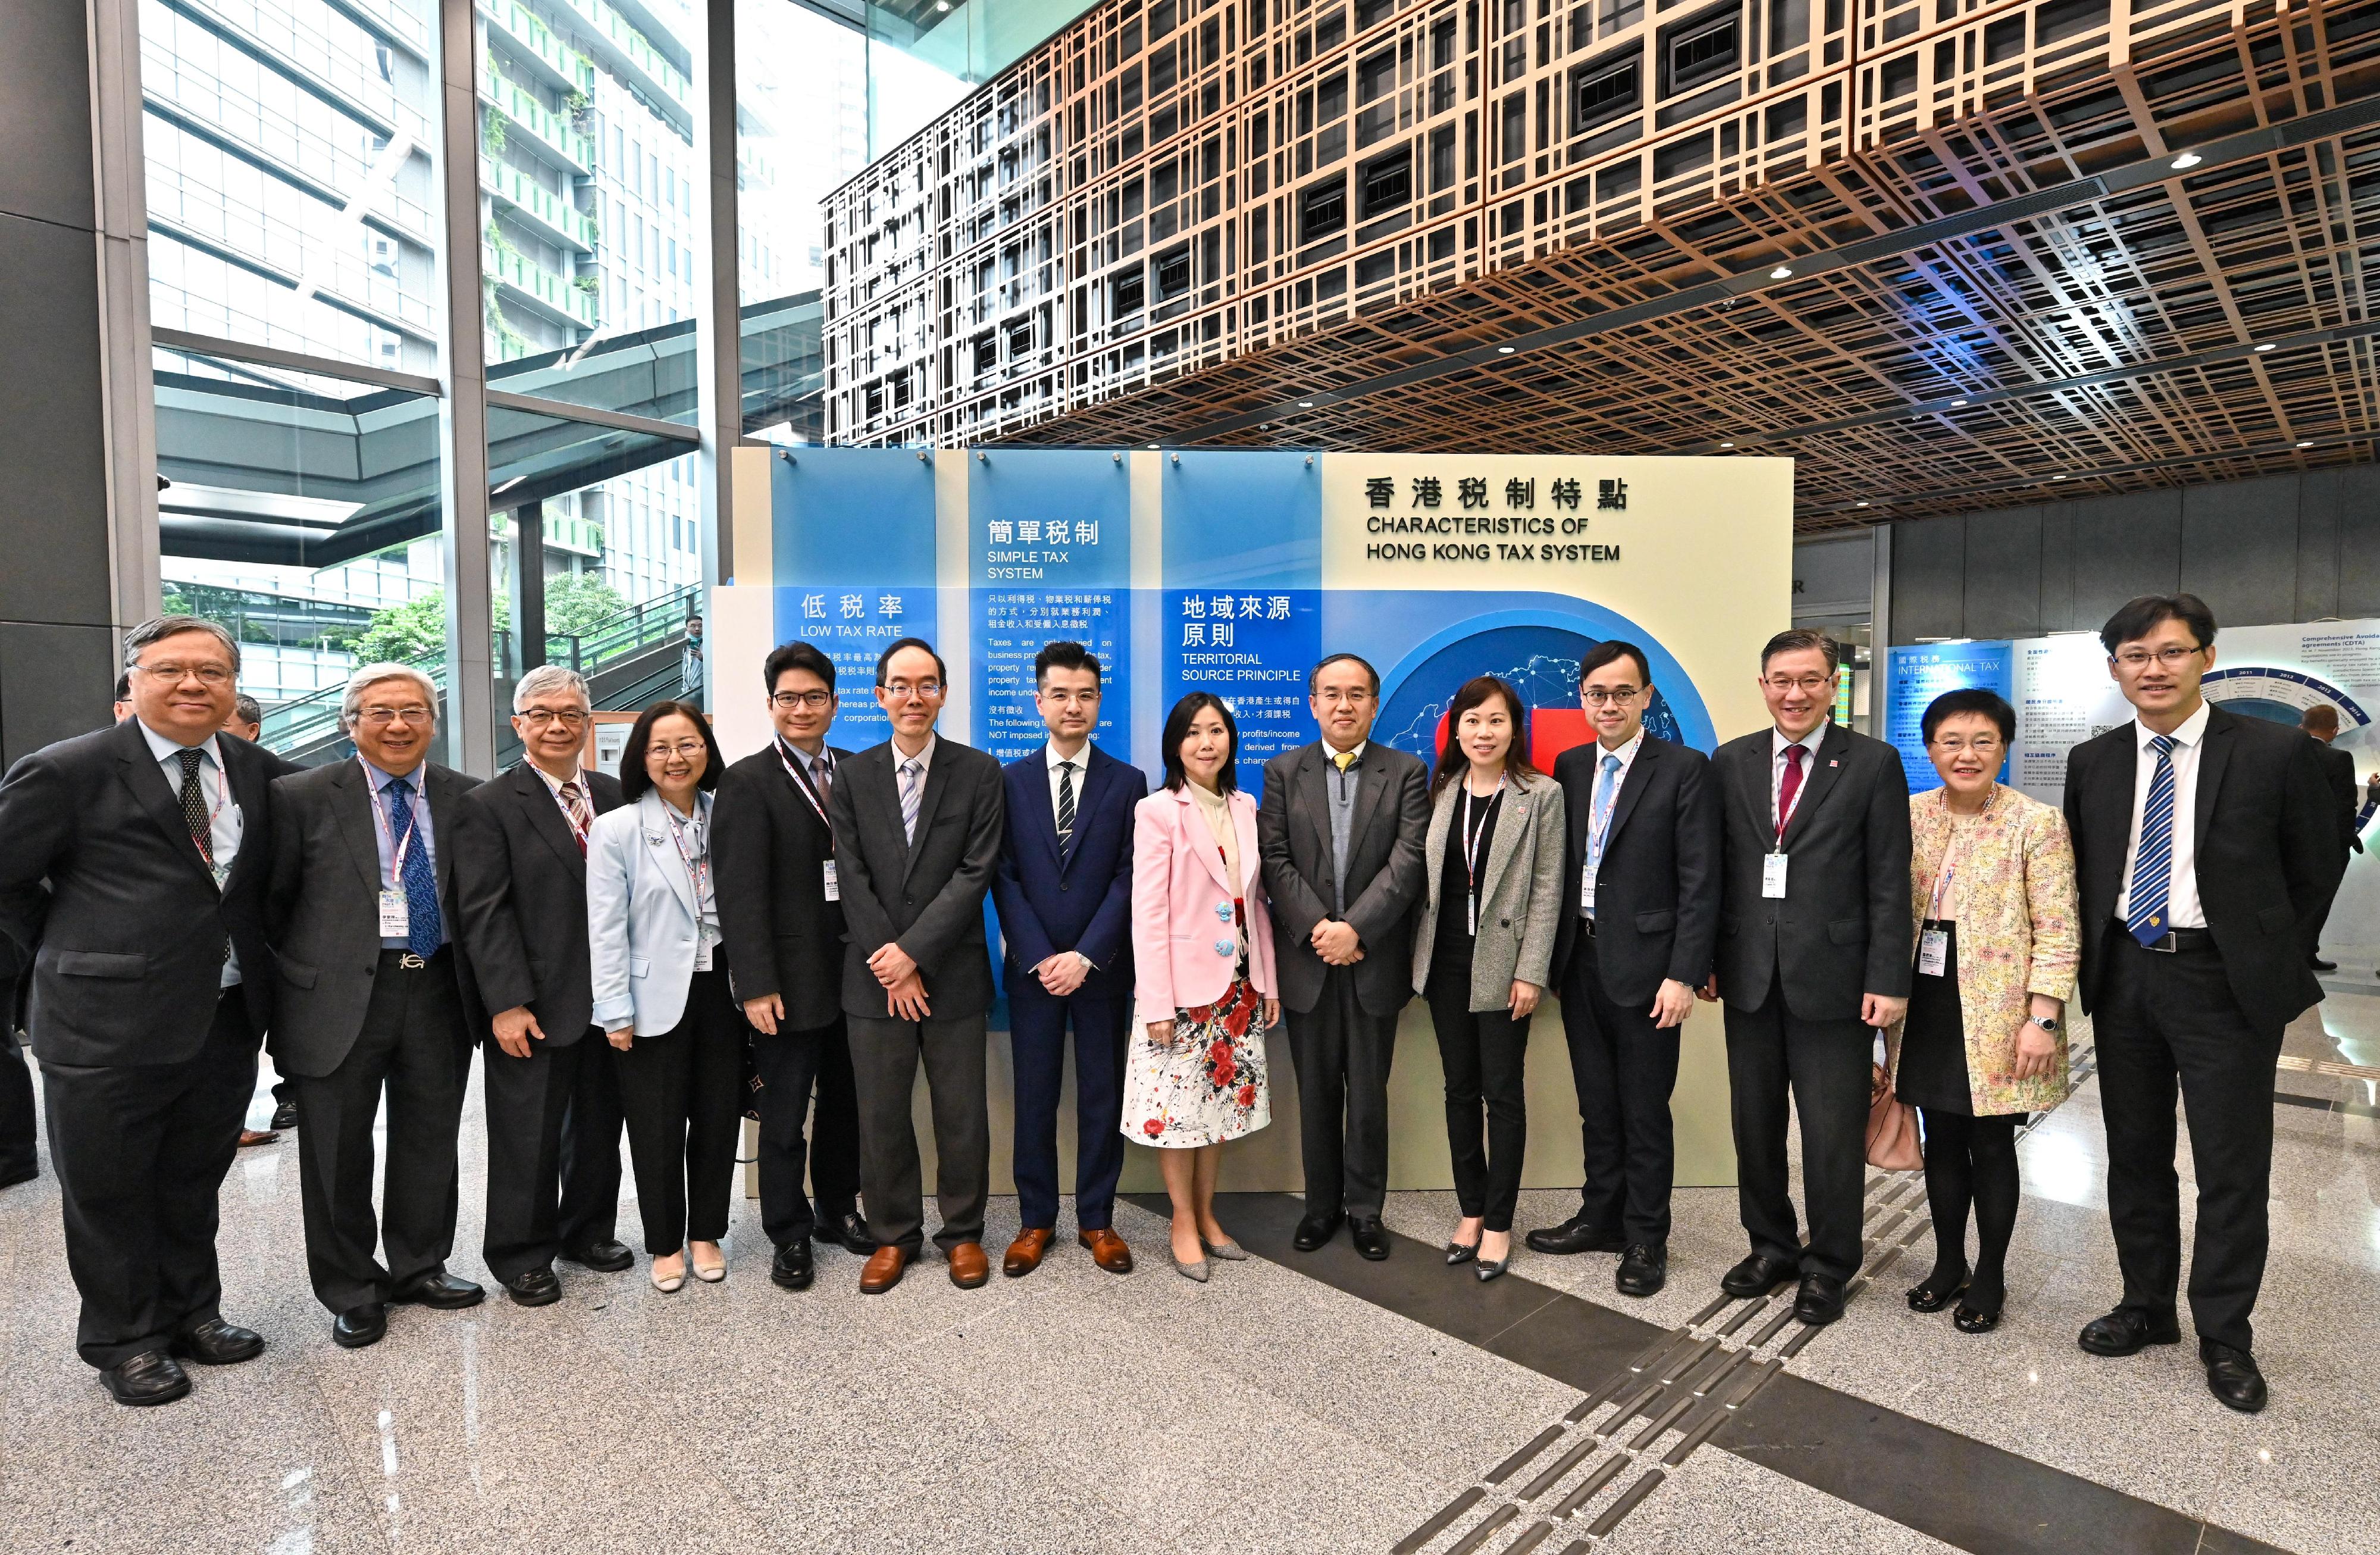 The opening ceremony of the Inland Revenue Centre was held today (March 30). Photo shows the Secretary for Financial Services and the Treasury, Mr Christopher Hui (sixth right); the Permanent Secretary for Financial Services and the Treasury (Treasury), Miss Cathy Chu (seventh right); the Under Secretary for Financial Services and the Treasury, Mr Joseph Chan (fifth left); and the Acting Commissioner of Inland Revenue, Mr Leung Kin-wa (sixth left), with colleagues from the Inland Revenue Department and other guests.